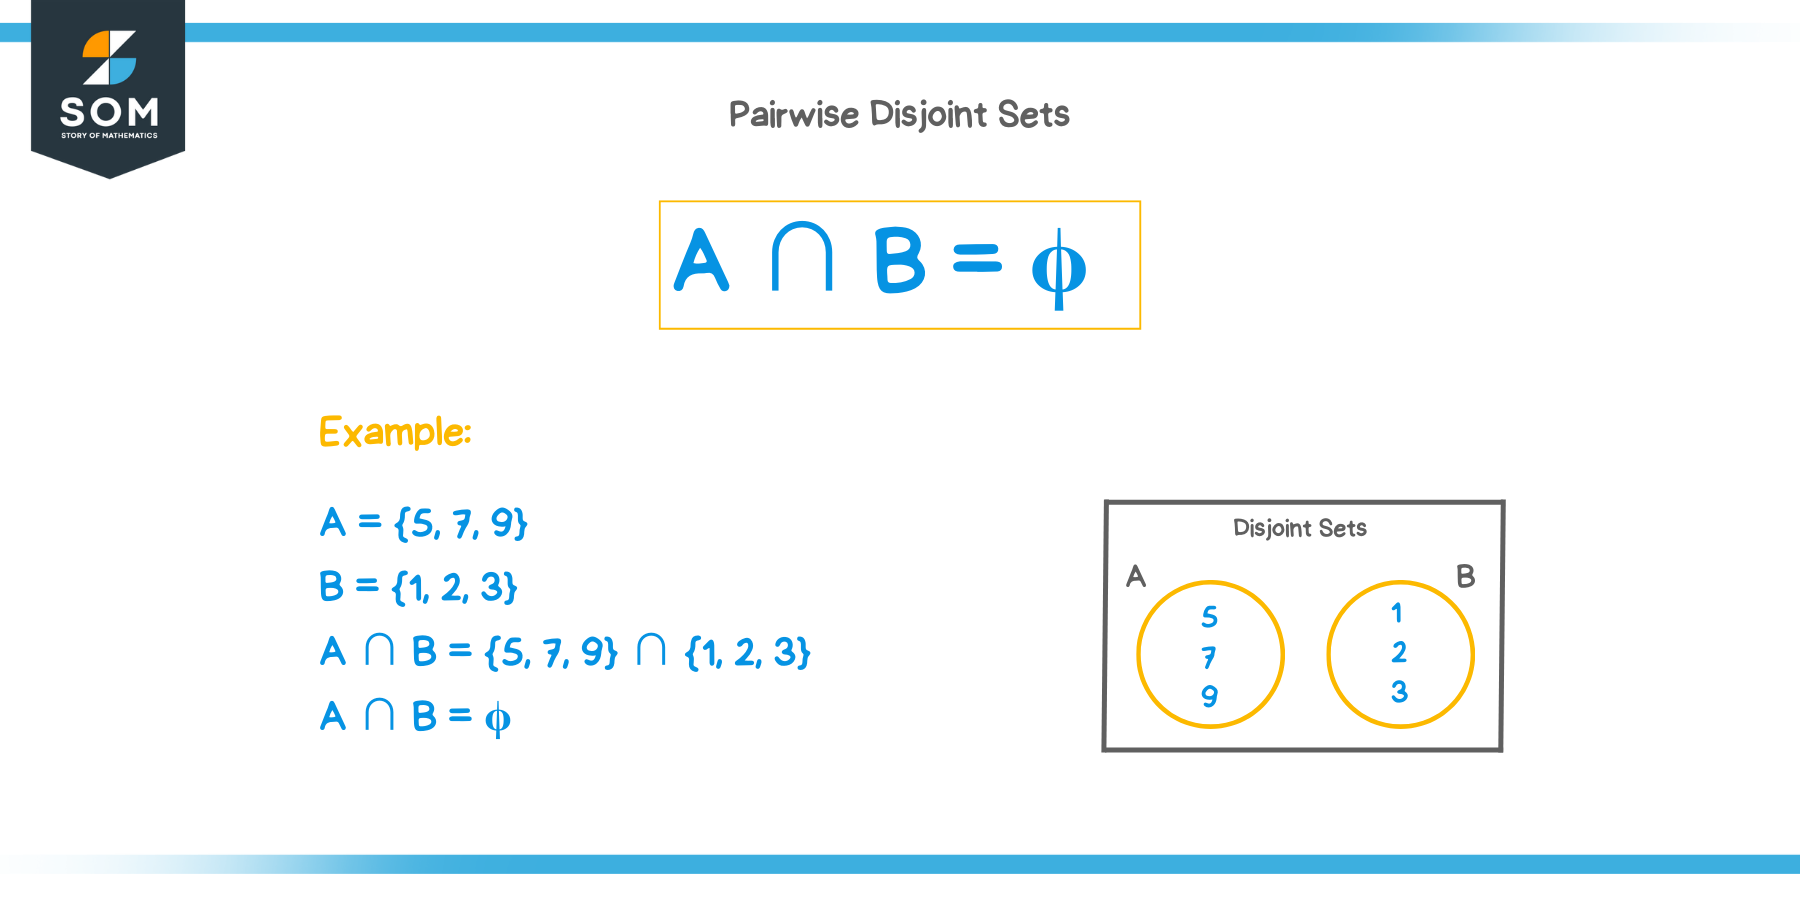 Pairwise Disjoint Sets